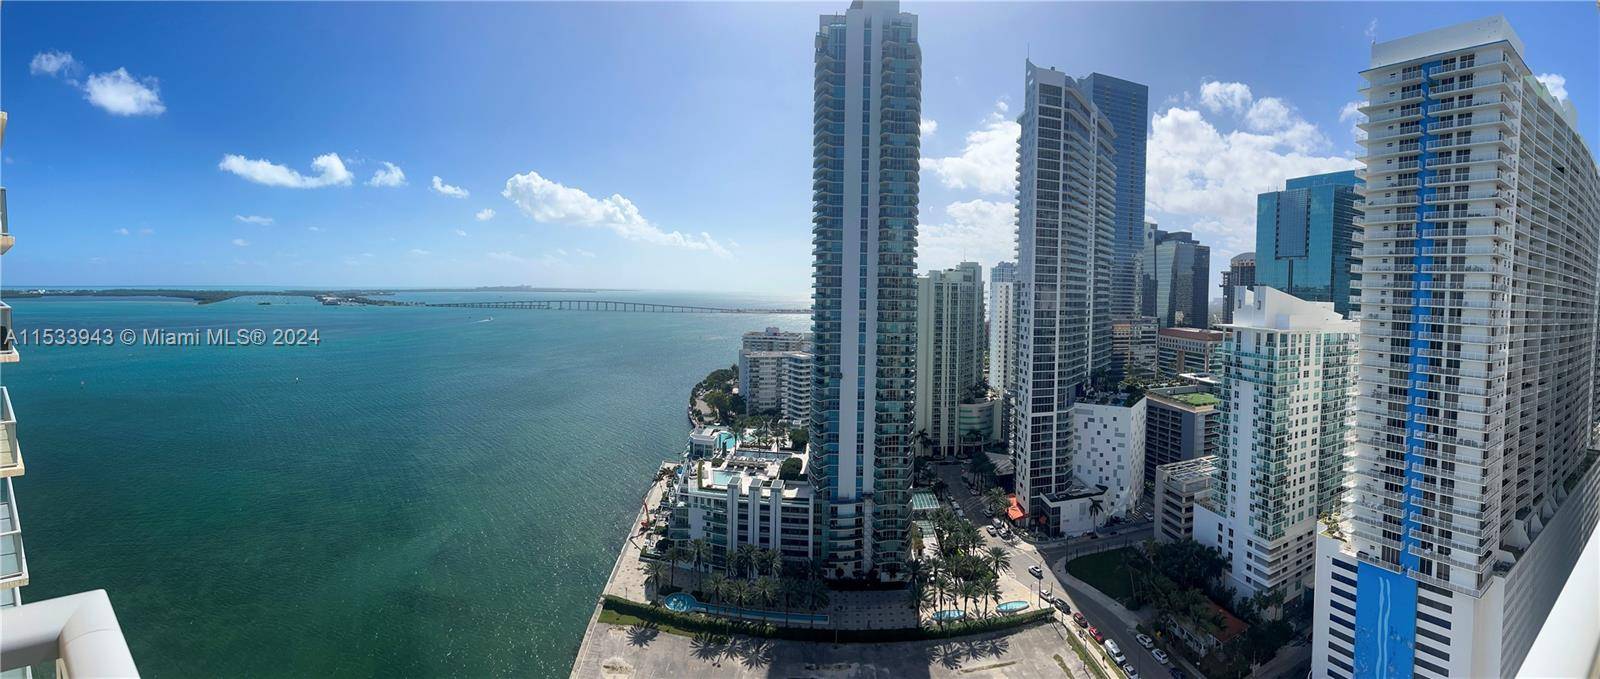 The updated unit is in the Mark on Brickell Bay.